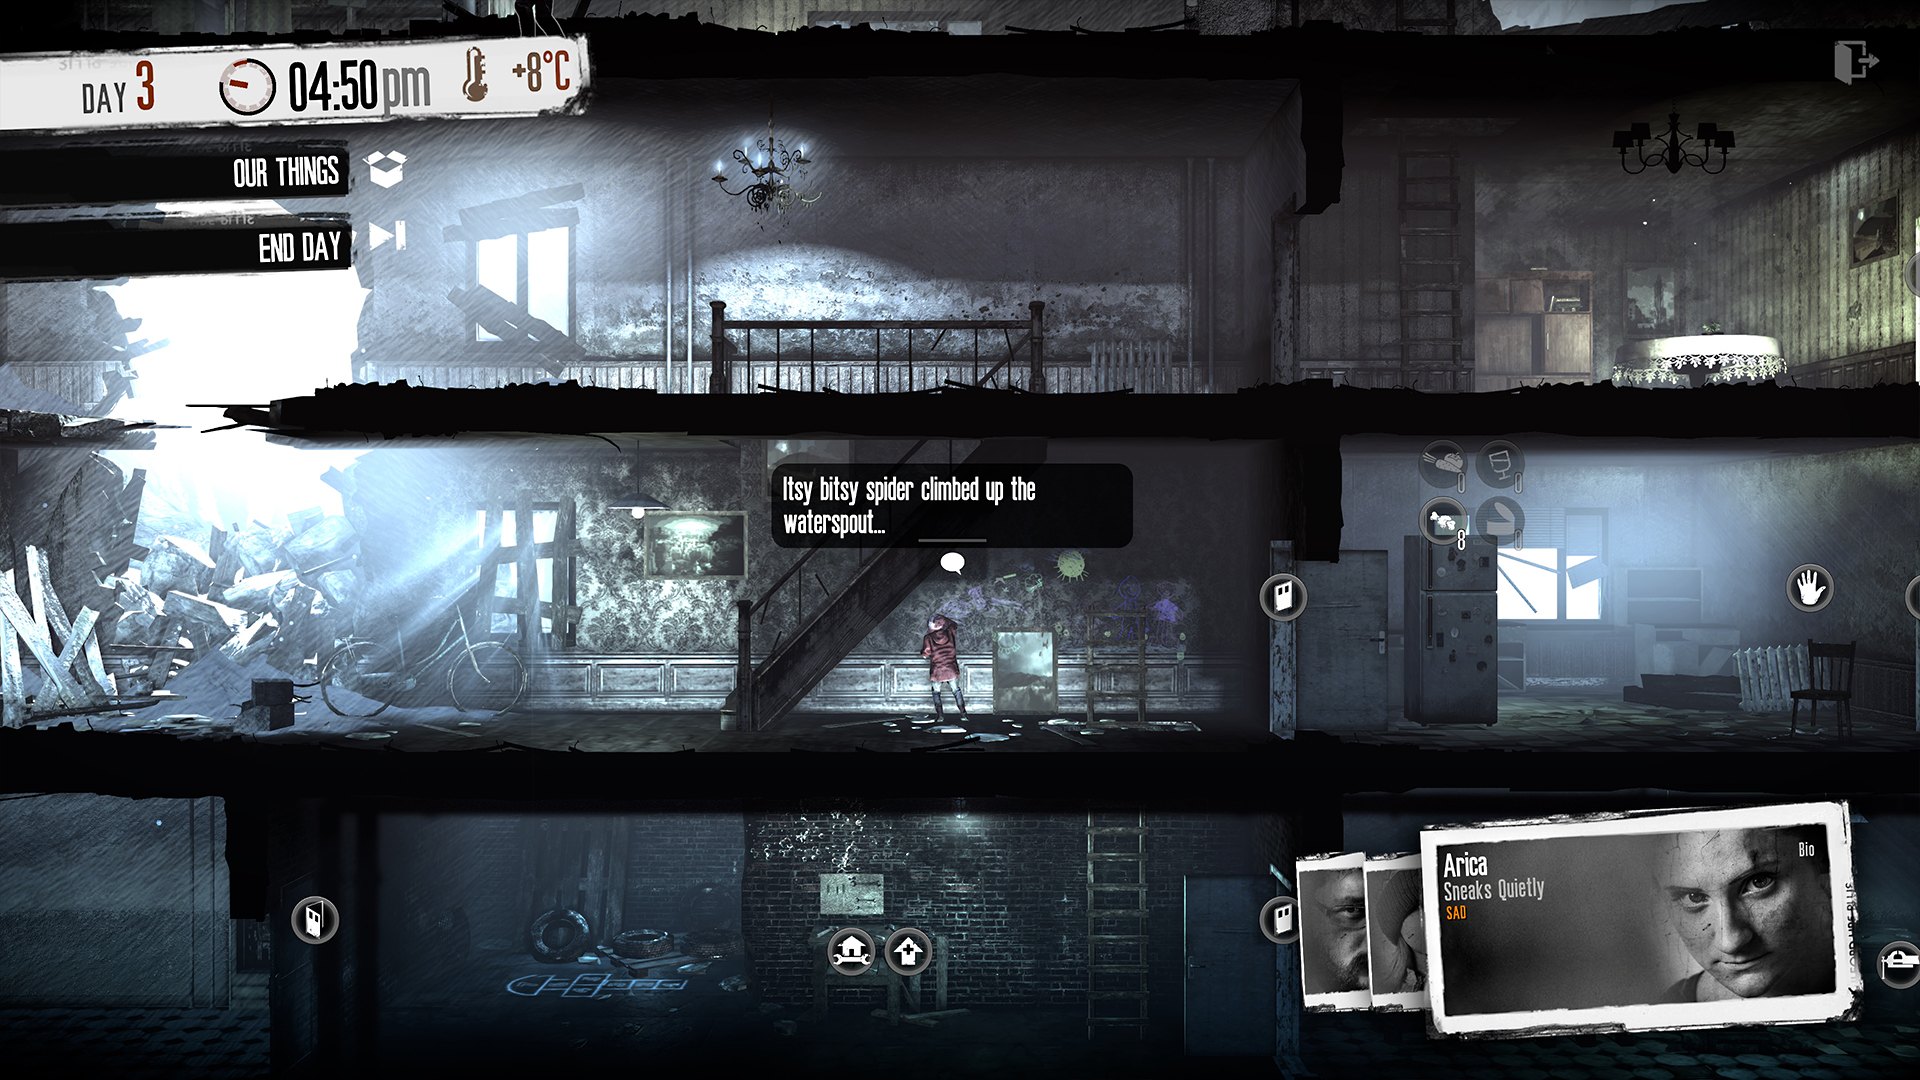 This War Of Mine: Complete Edition GOG CD Key